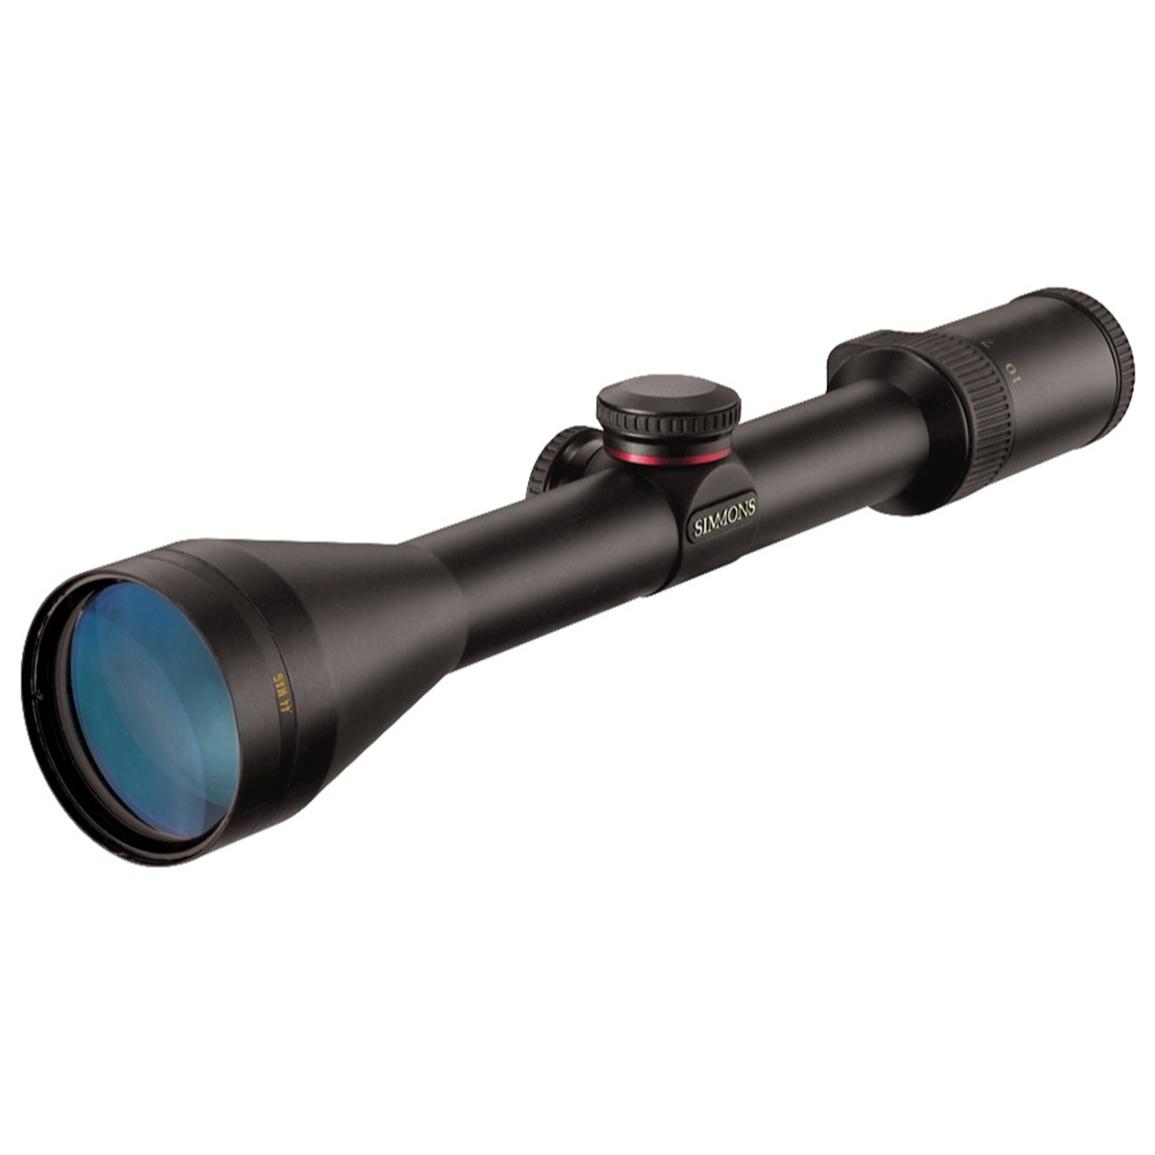 simmons-44-mag-3-10x44-mm-riflescope-210148-rifle-scopes-and